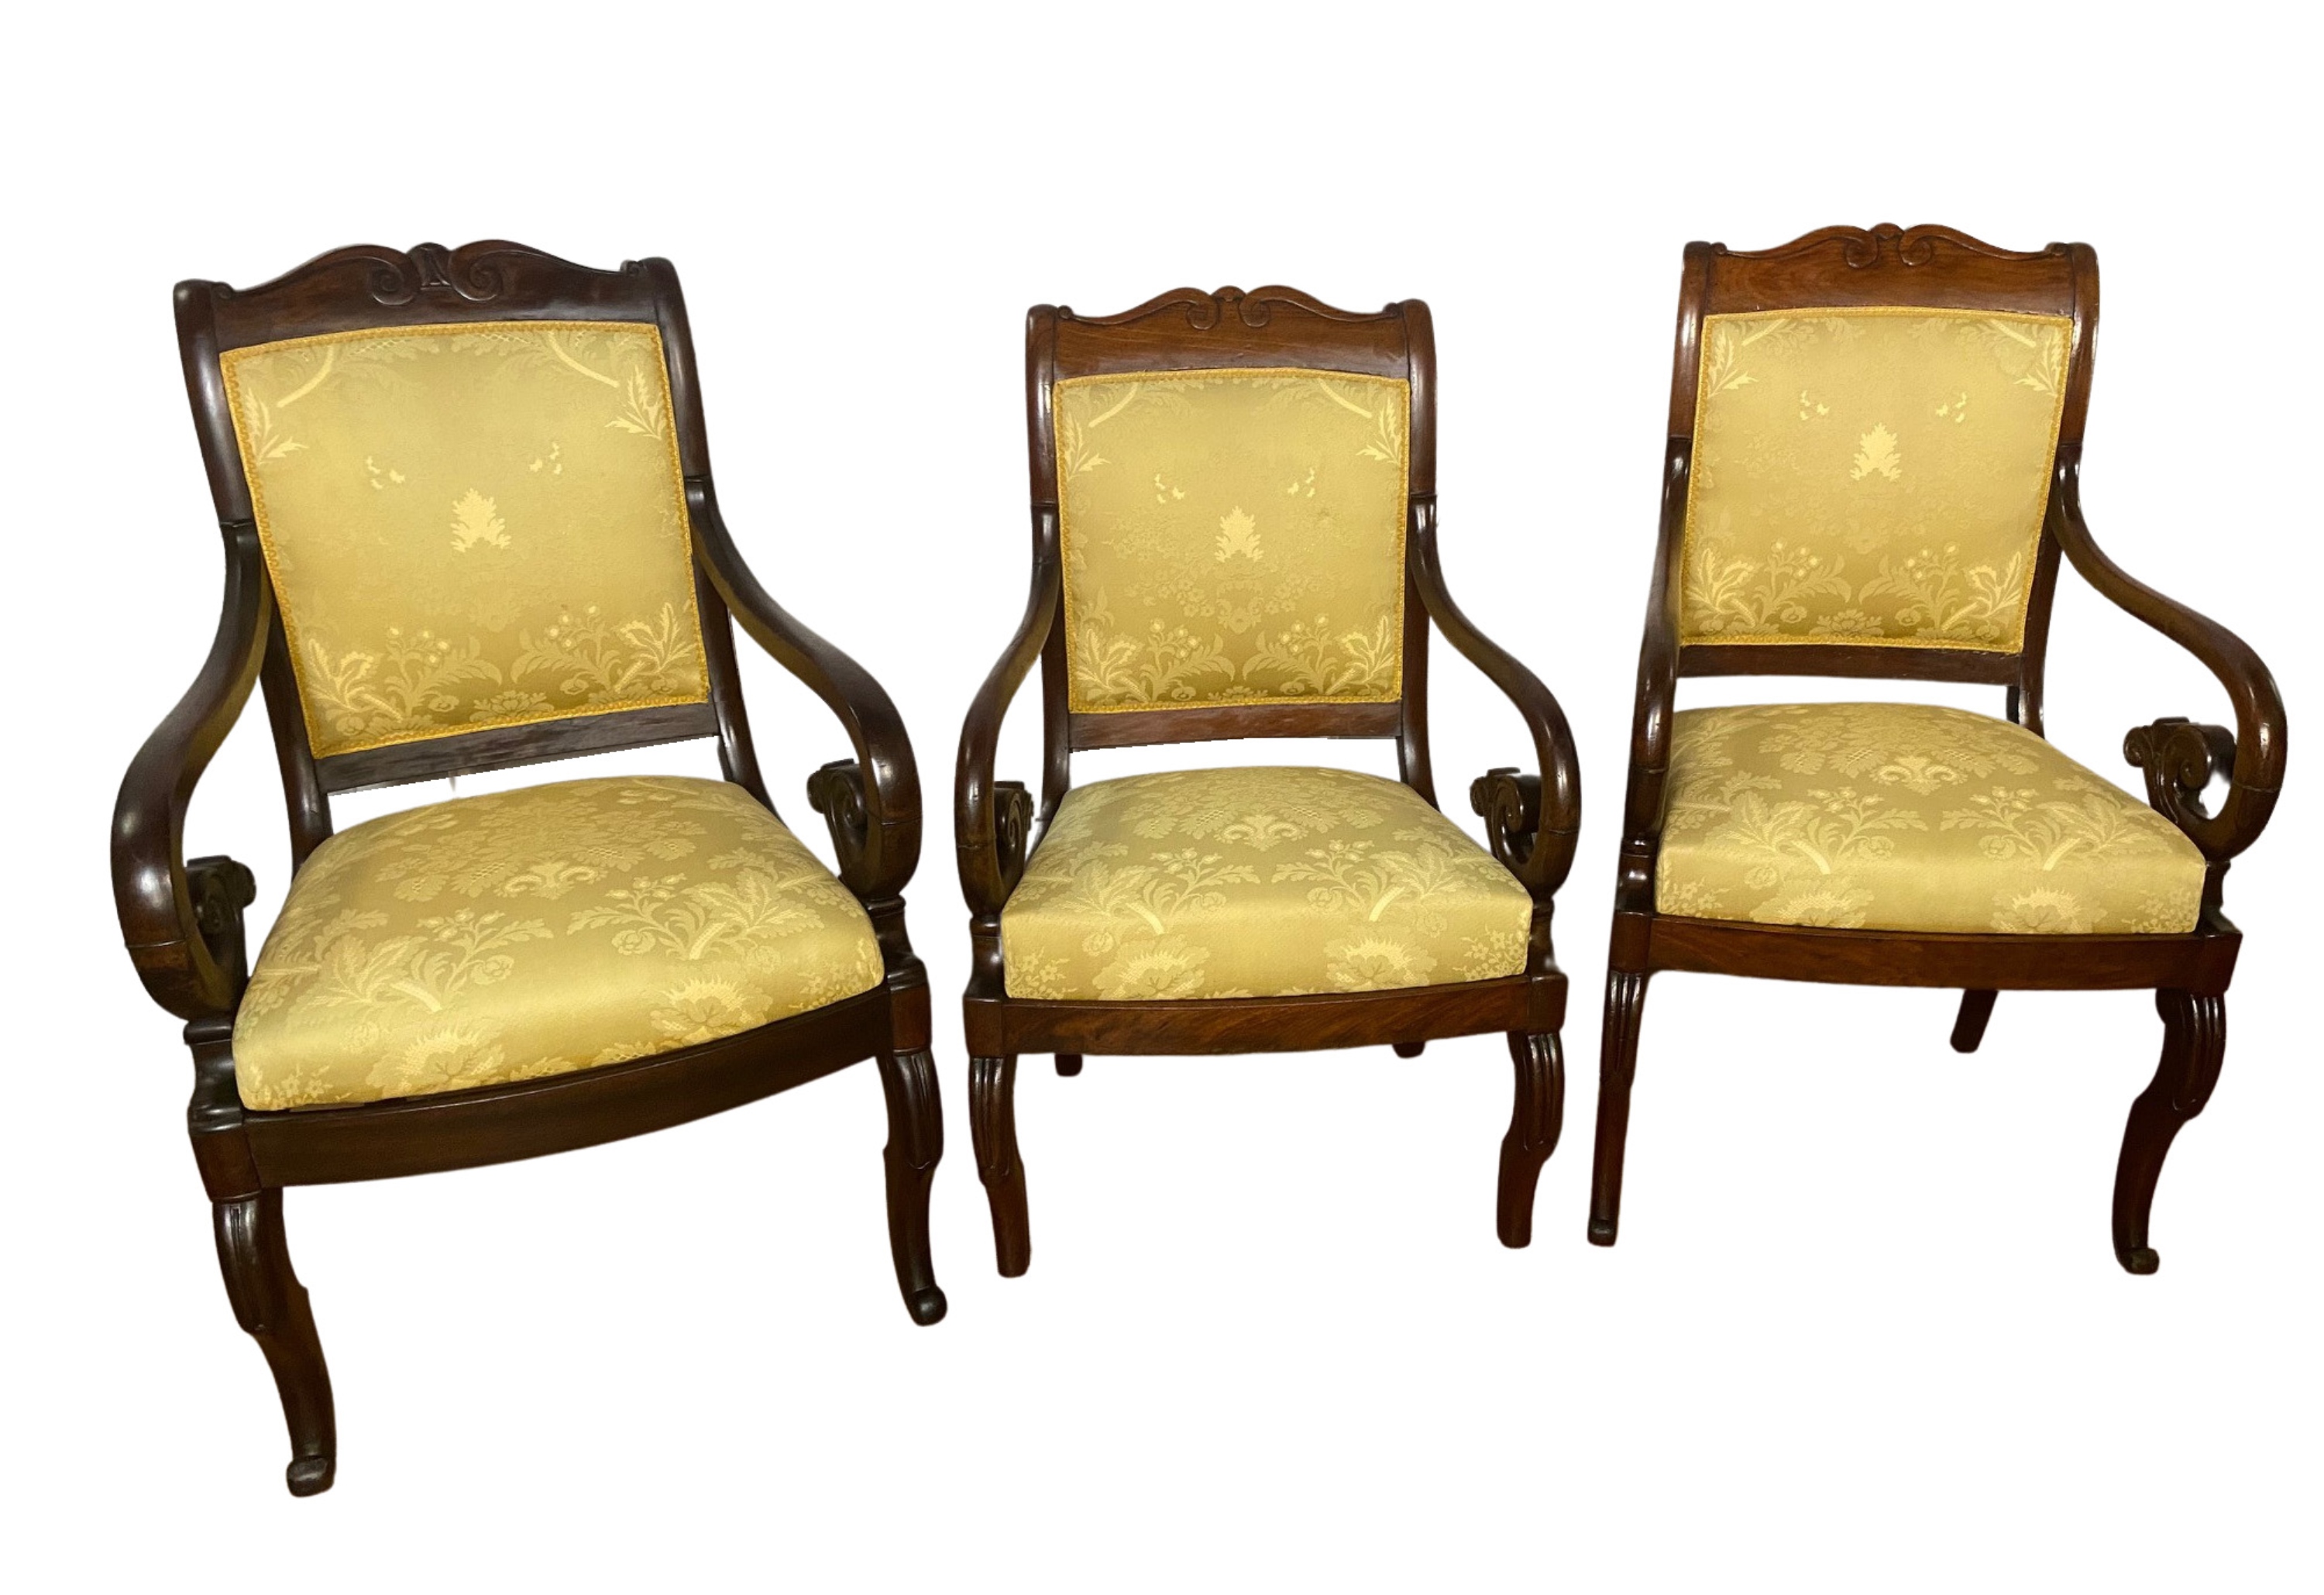 3 ANTIQUE MAHOGANY FRENCH ARM CHAIRS